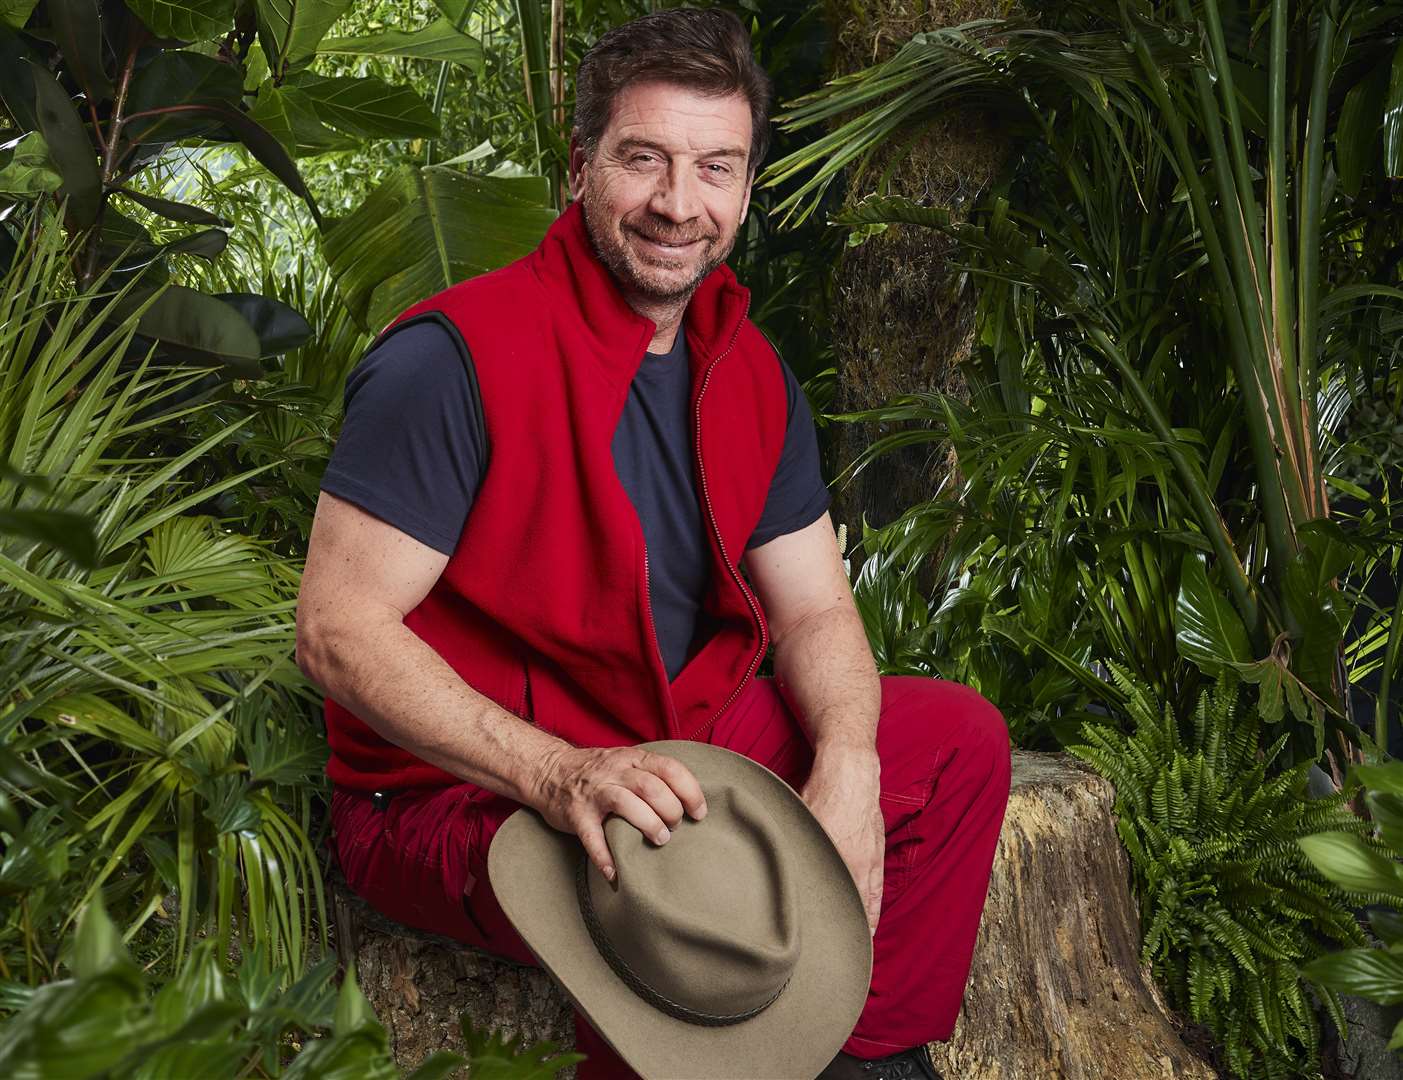 DIY SOS and Who Dares Wins host Nick Knowles will brave the I'm a Celeb... jungle this weekend